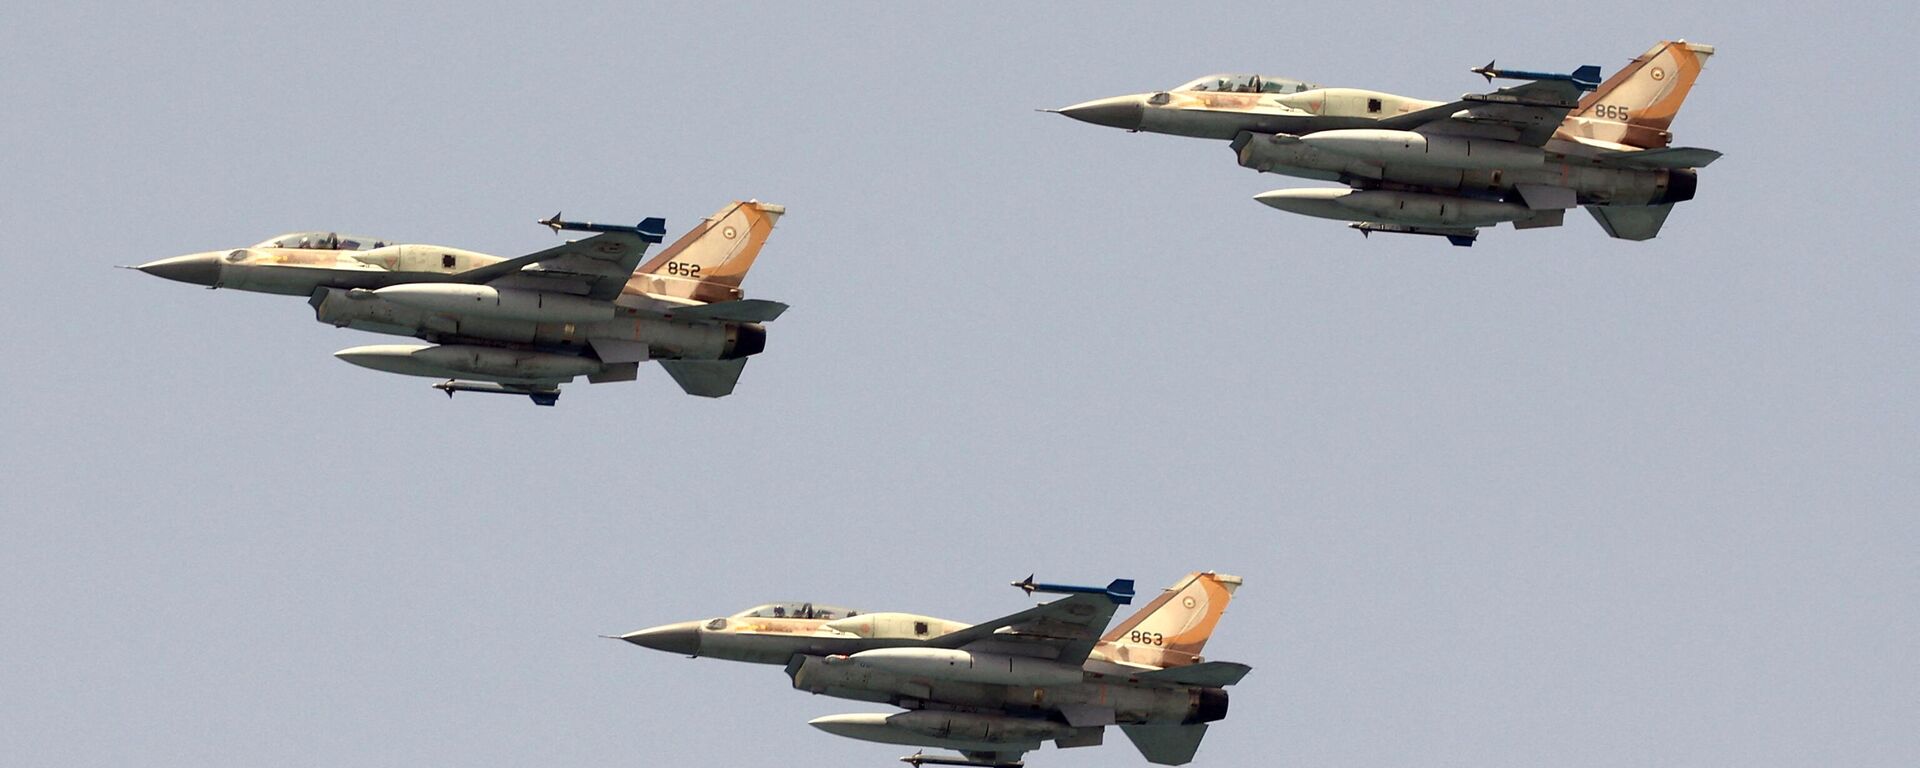 Israeli F-16 fighter jets perform during an air show over the beach in the Israeli coastal city of Tel Aviv on May 5, 2022, as Israel marks Independence Day (Yom HaAtzmaut), 74 years since the establishment of the Jewish state  - Sputnik International, 1920, 29.11.2022